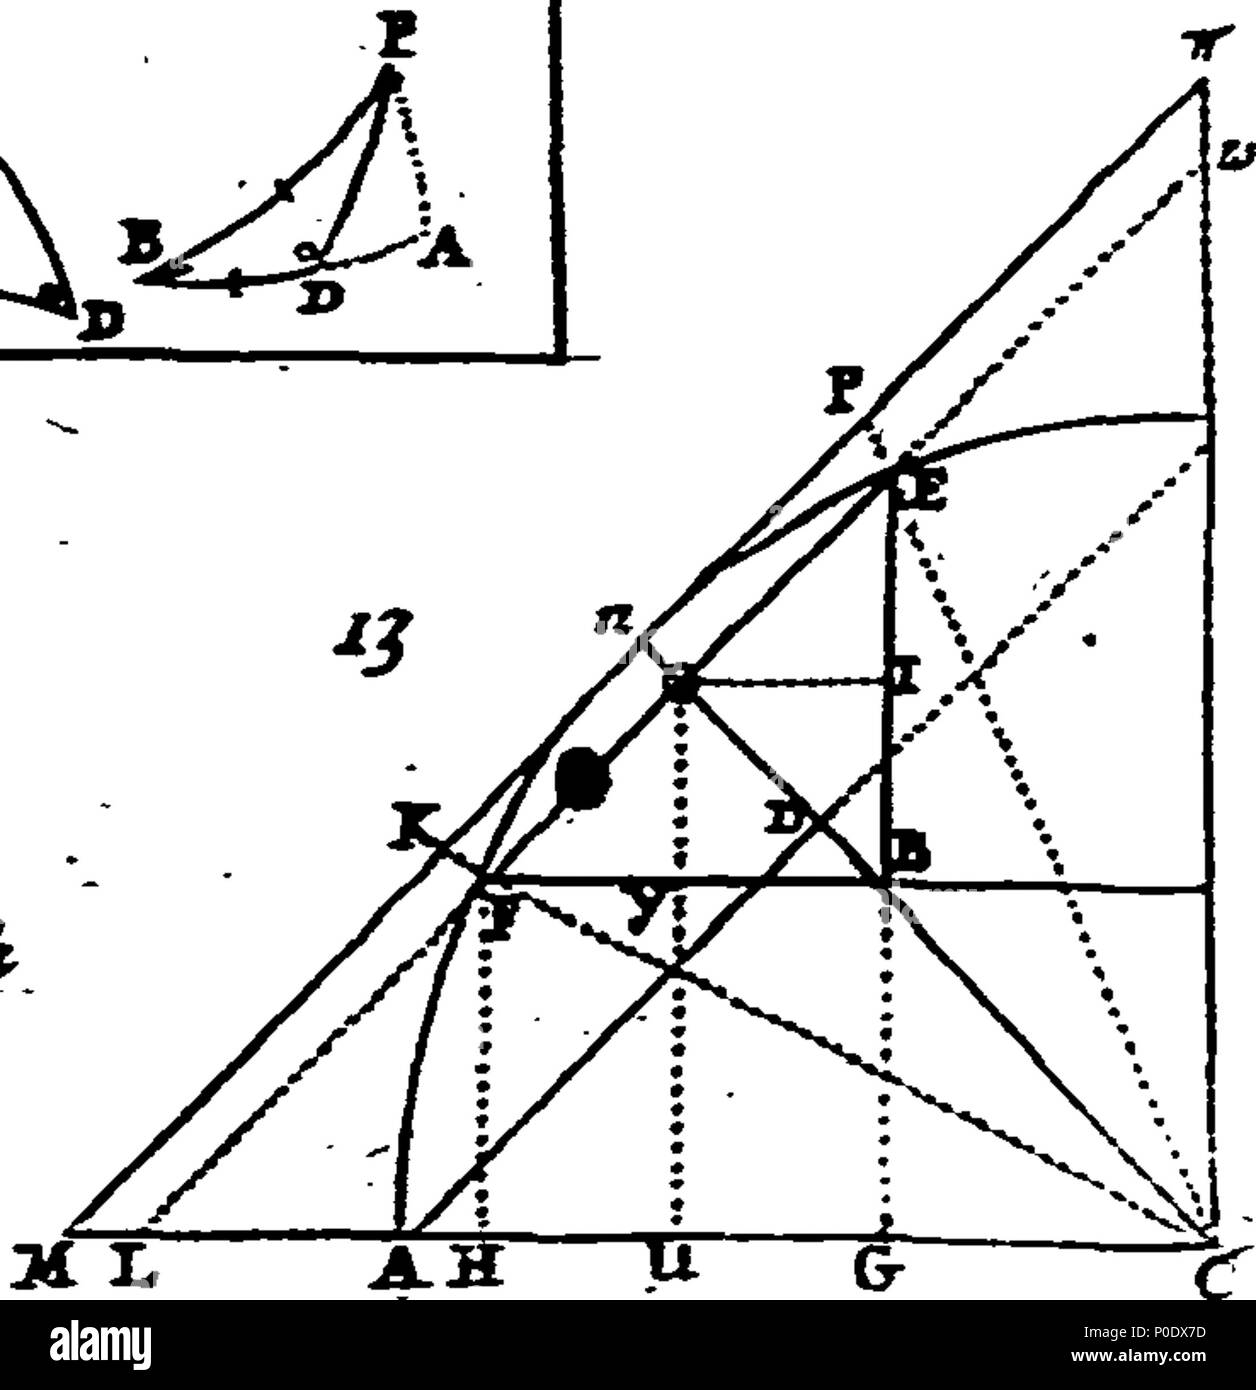 . English: Fleuron from book: A treatise of trigonometry, plane and spherical, theoretical and practical. In which the several cases of plane and spherical triangles are solved, instrumentally and arithmetically. As likewise a Treatise of Stereographic and Orthographic Projection of the Sphere. In which the Principles and Theorems on which they depend, are clearly Demonstrated, and the Practice naturally deduced from those Demonstrations. Illustrated in the Stereographic Projection of the several Cases in Right and Oblique Angled, Spherical, Triangles: So that the Requisites may be found witho Stock Photo